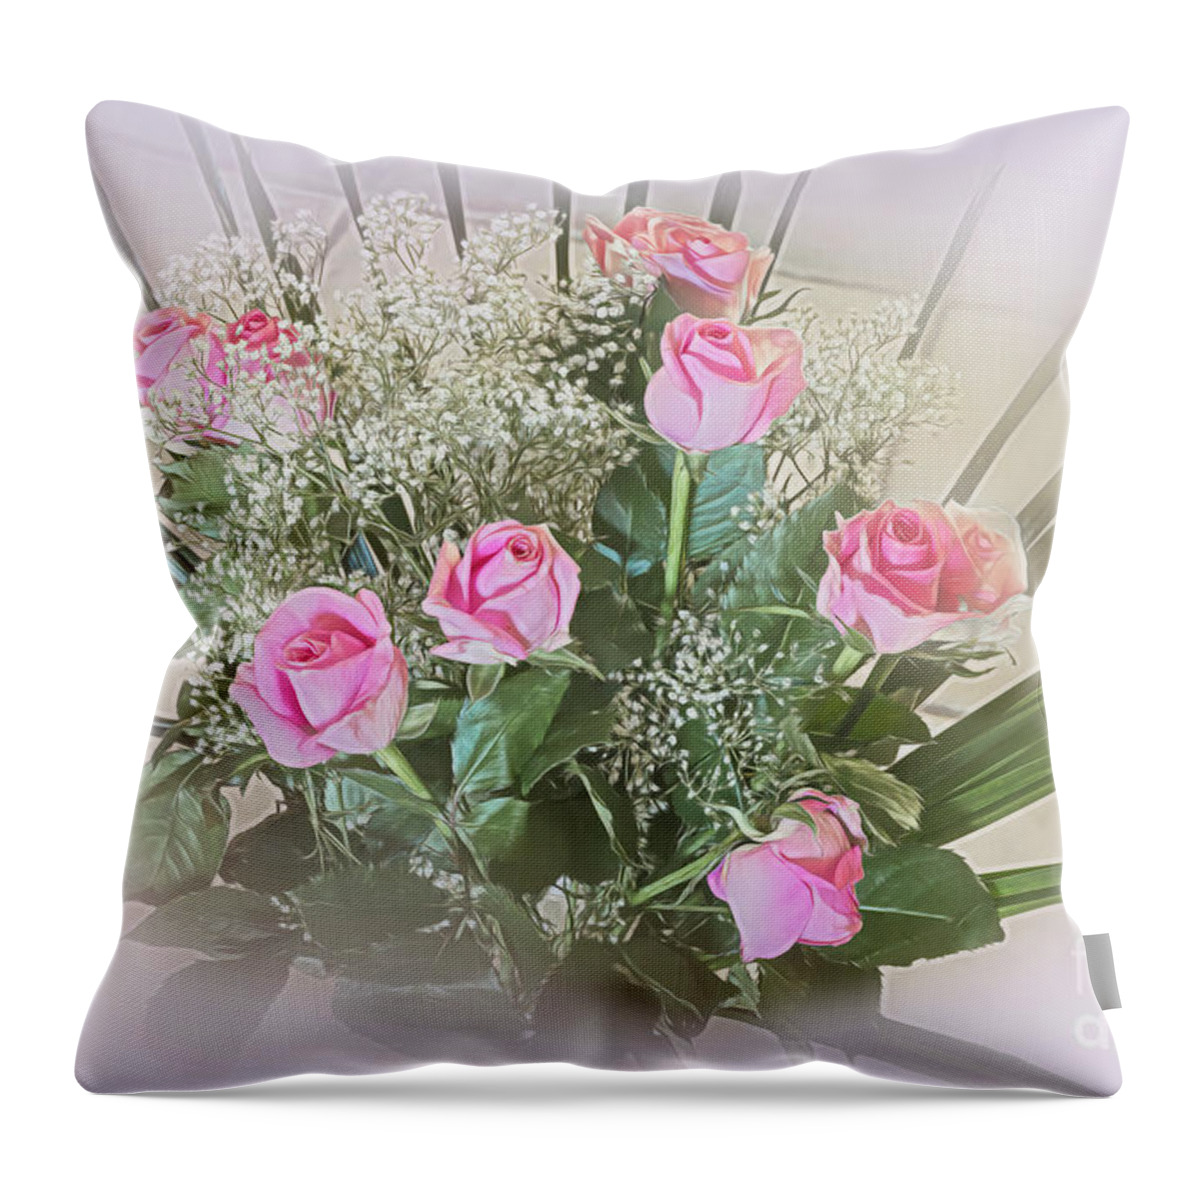 Roses Throw Pillow featuring the photograph Rosy Posy by Elaine Teague